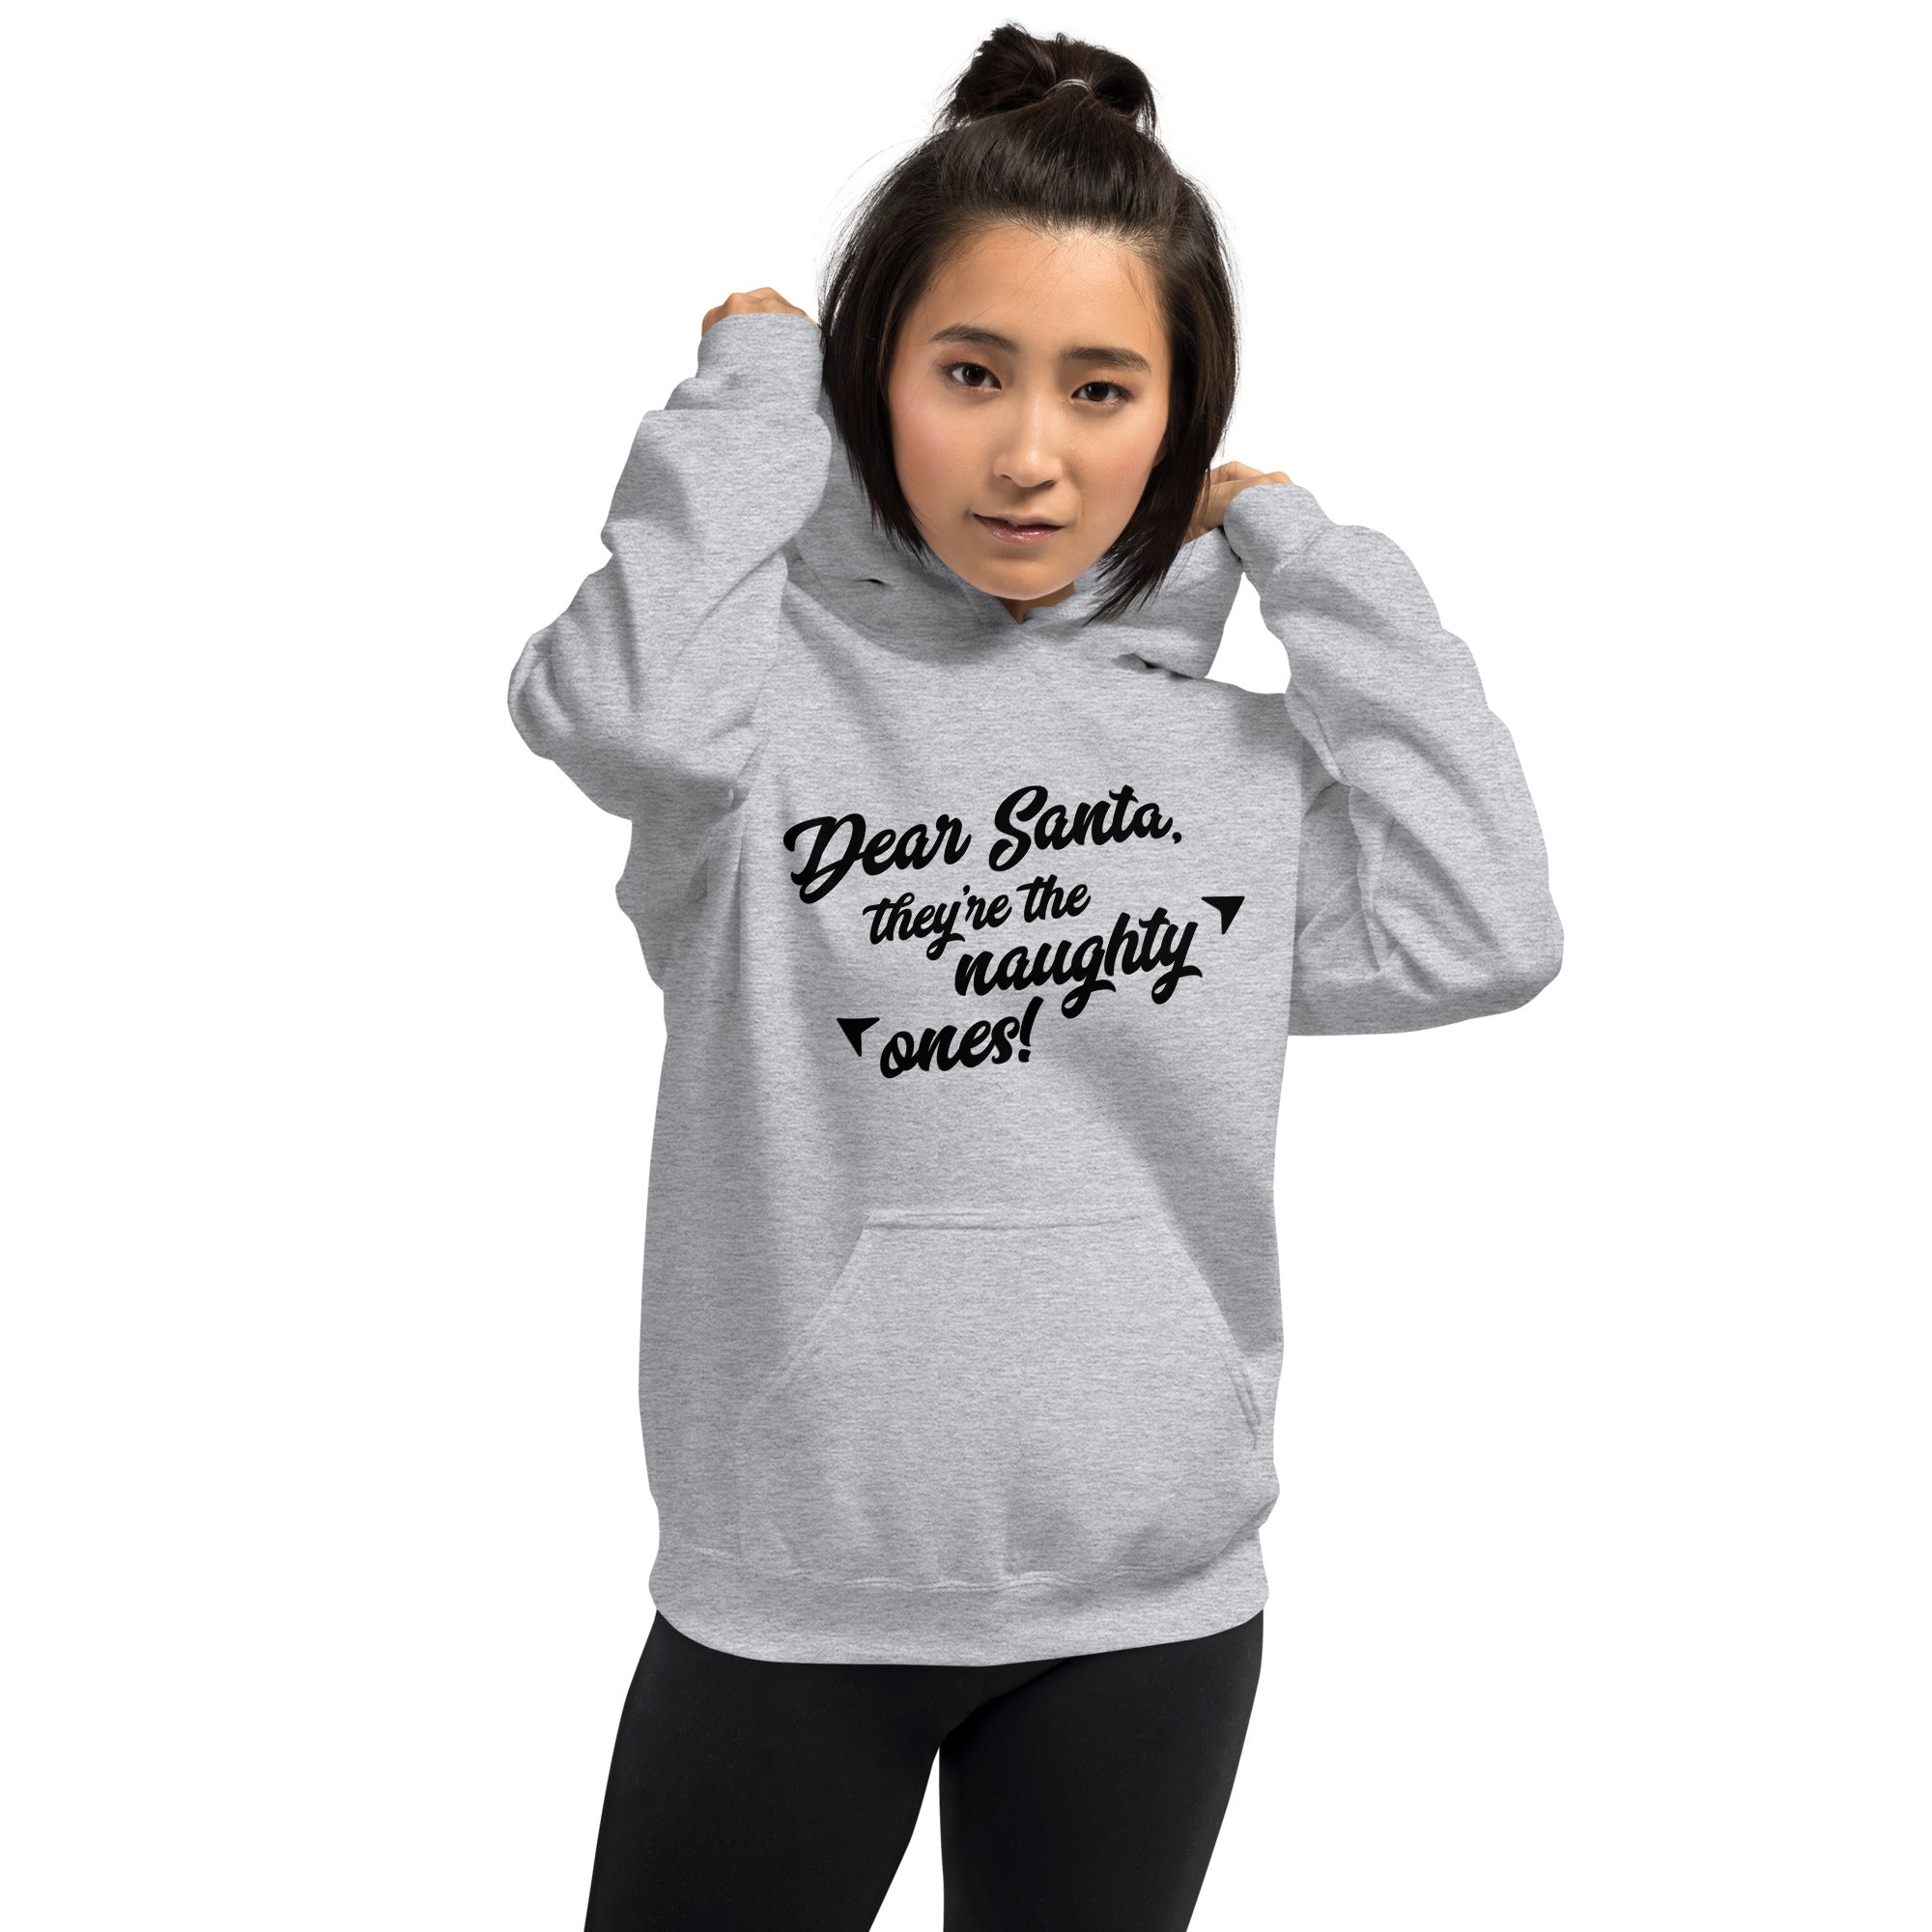 Dear Santa They're The Naughty Ones - Unisex Hoodie